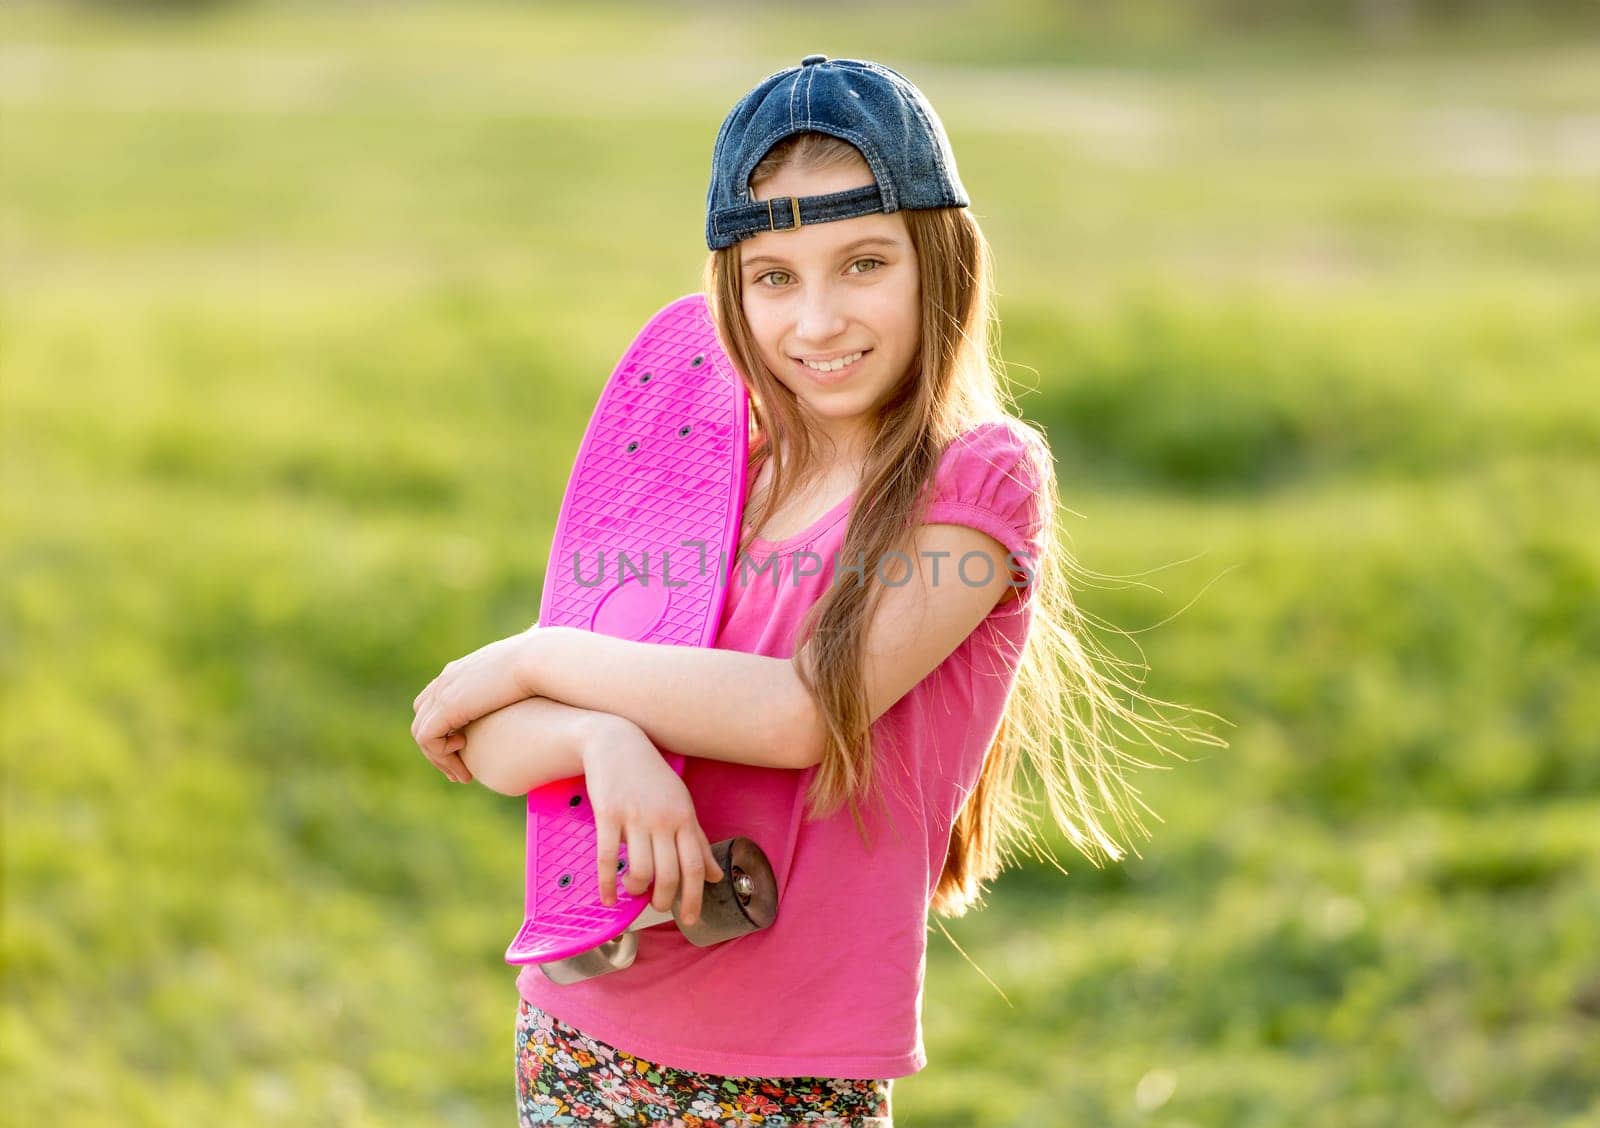 Attractive teenage girl with a cap on holding her bright pink skating board, smiling